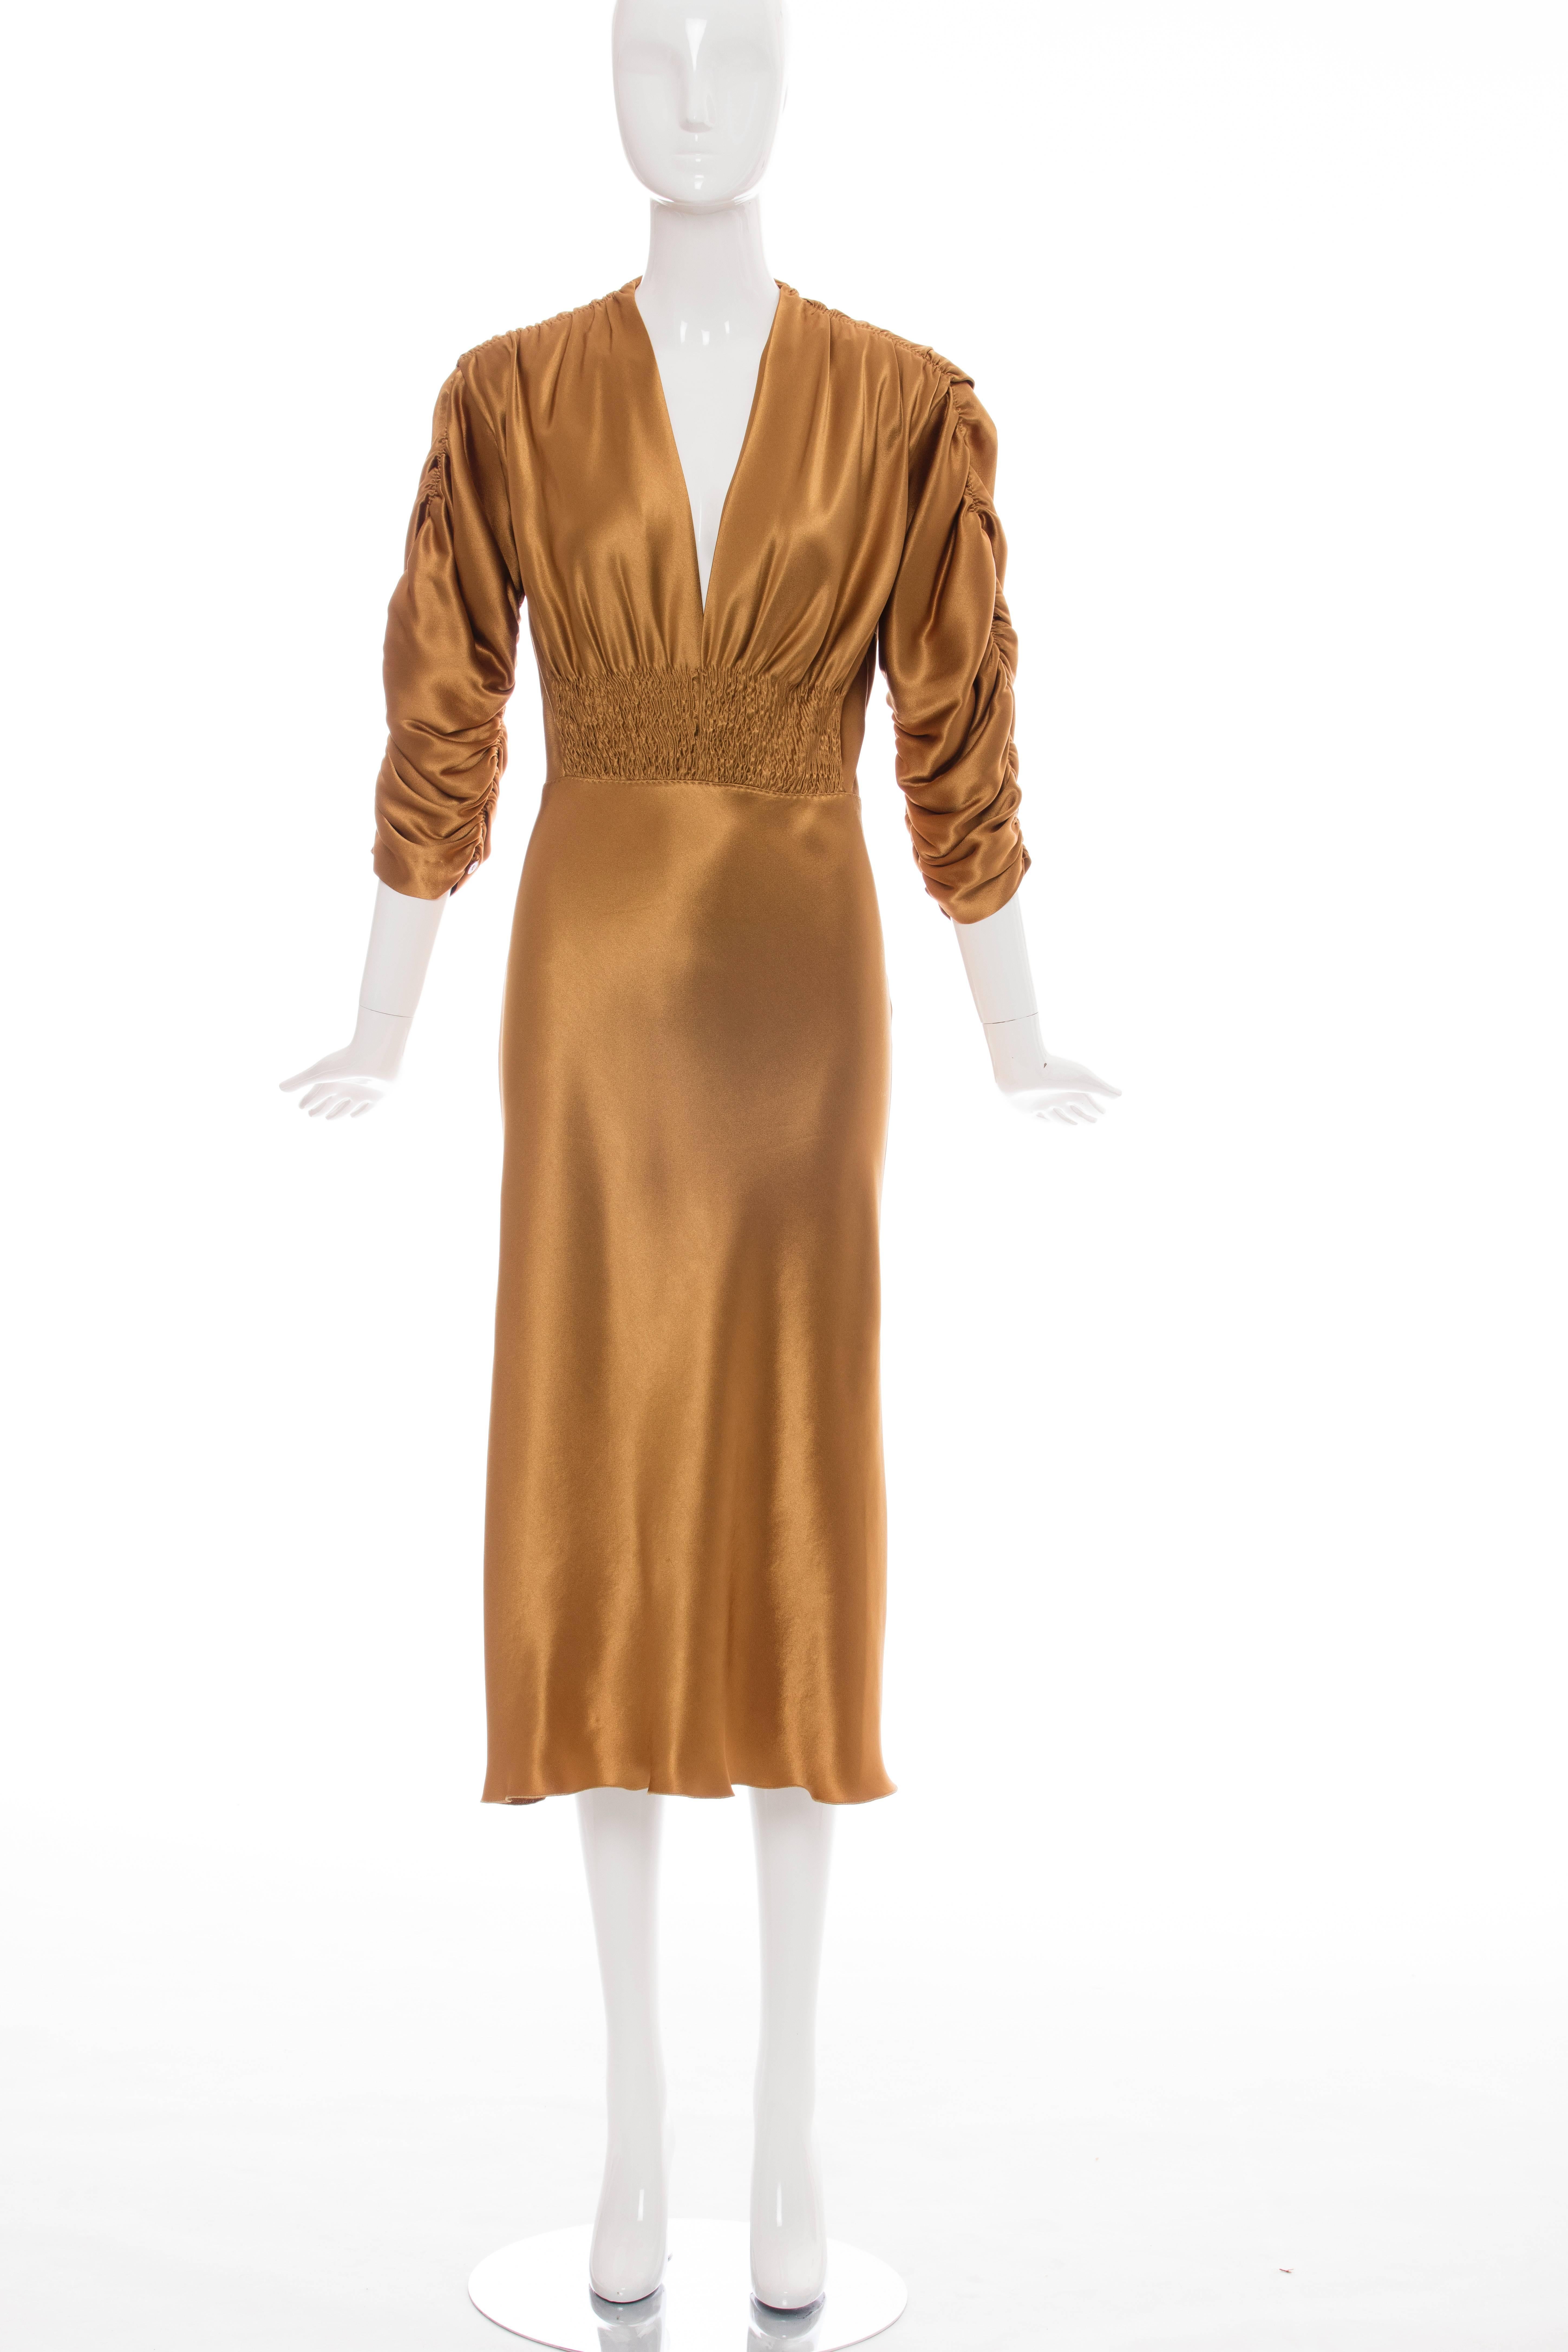 Jean Paul Gaultier, circa 1990's, silk charmeuse dress with smocking at waist, ruching at shoulders and sleeves, snap front and side zip.

US. 8